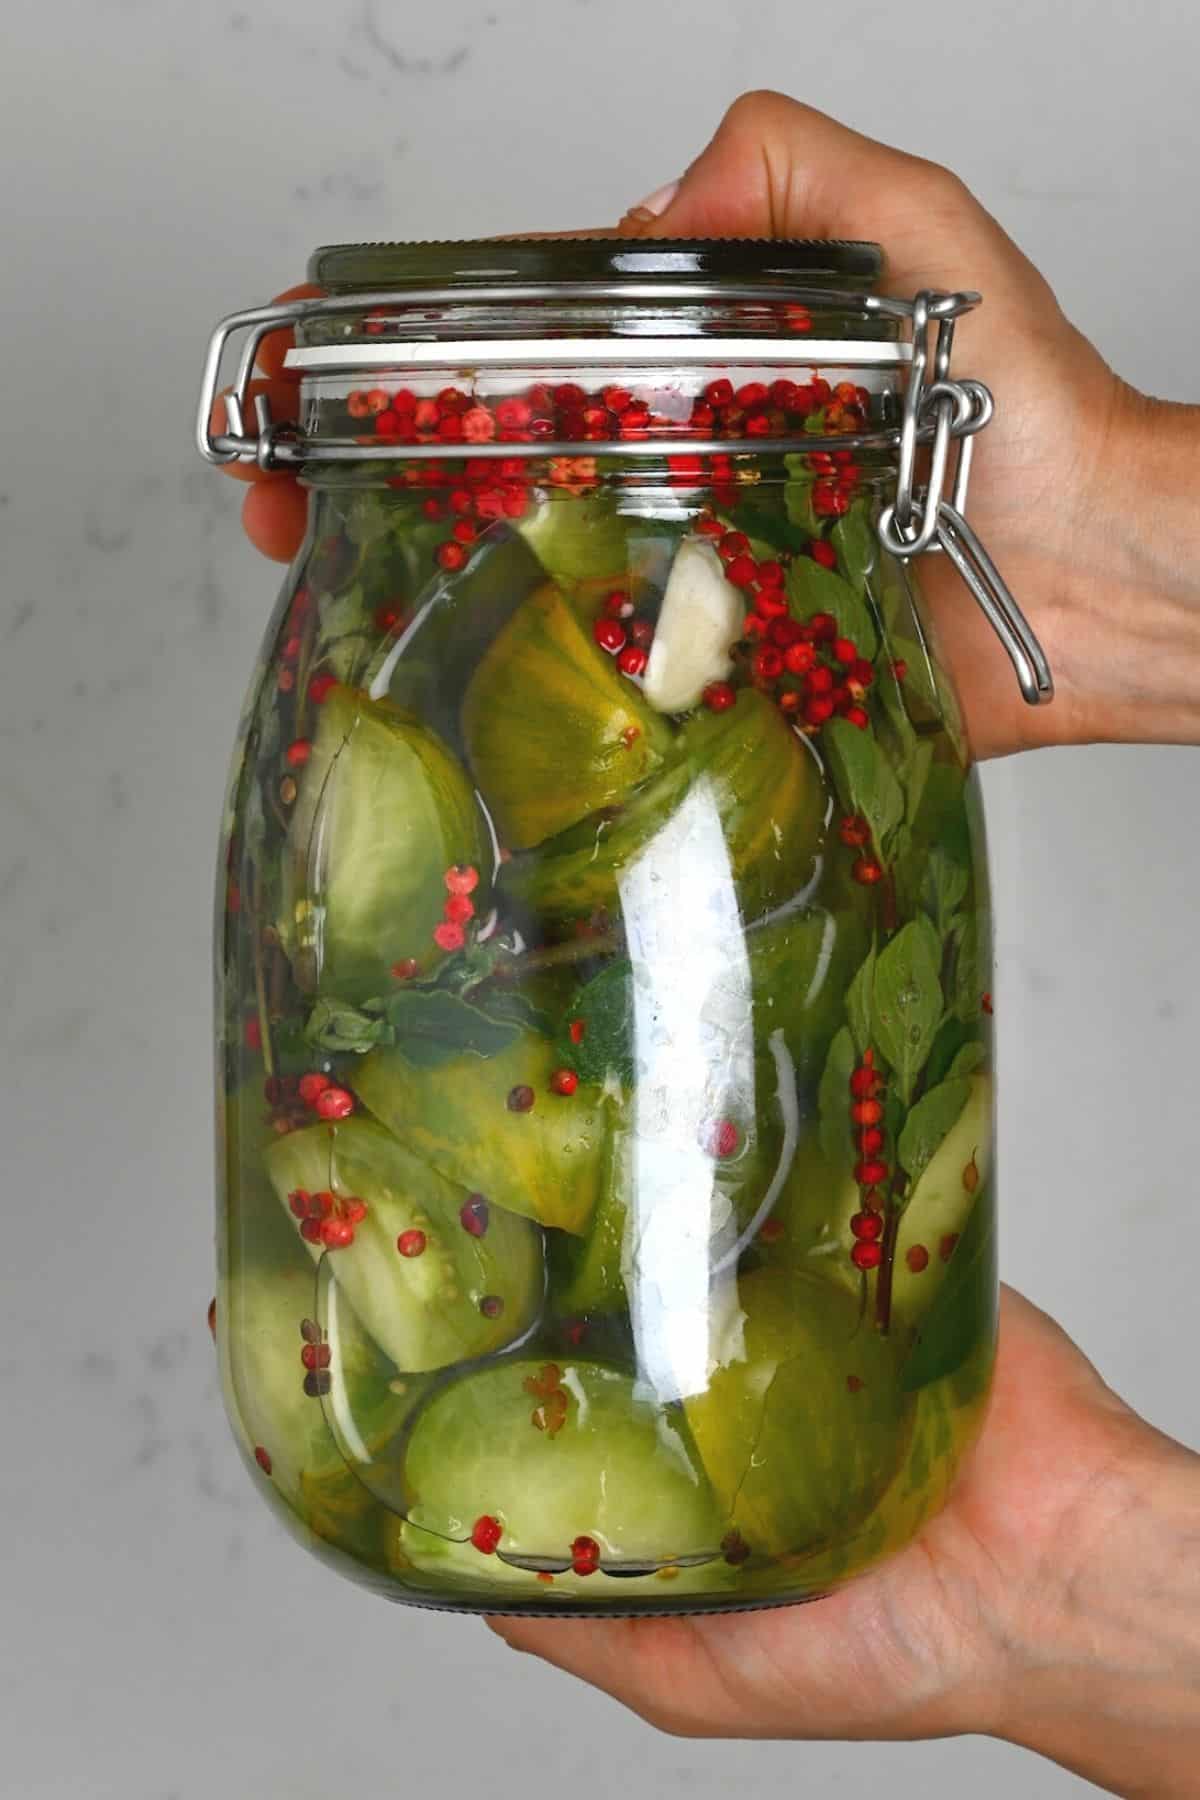 https://www.alphafoodie.com/wp-content/uploads/2021/07/Pickled-Green-Tomatoes-Main1.jpg